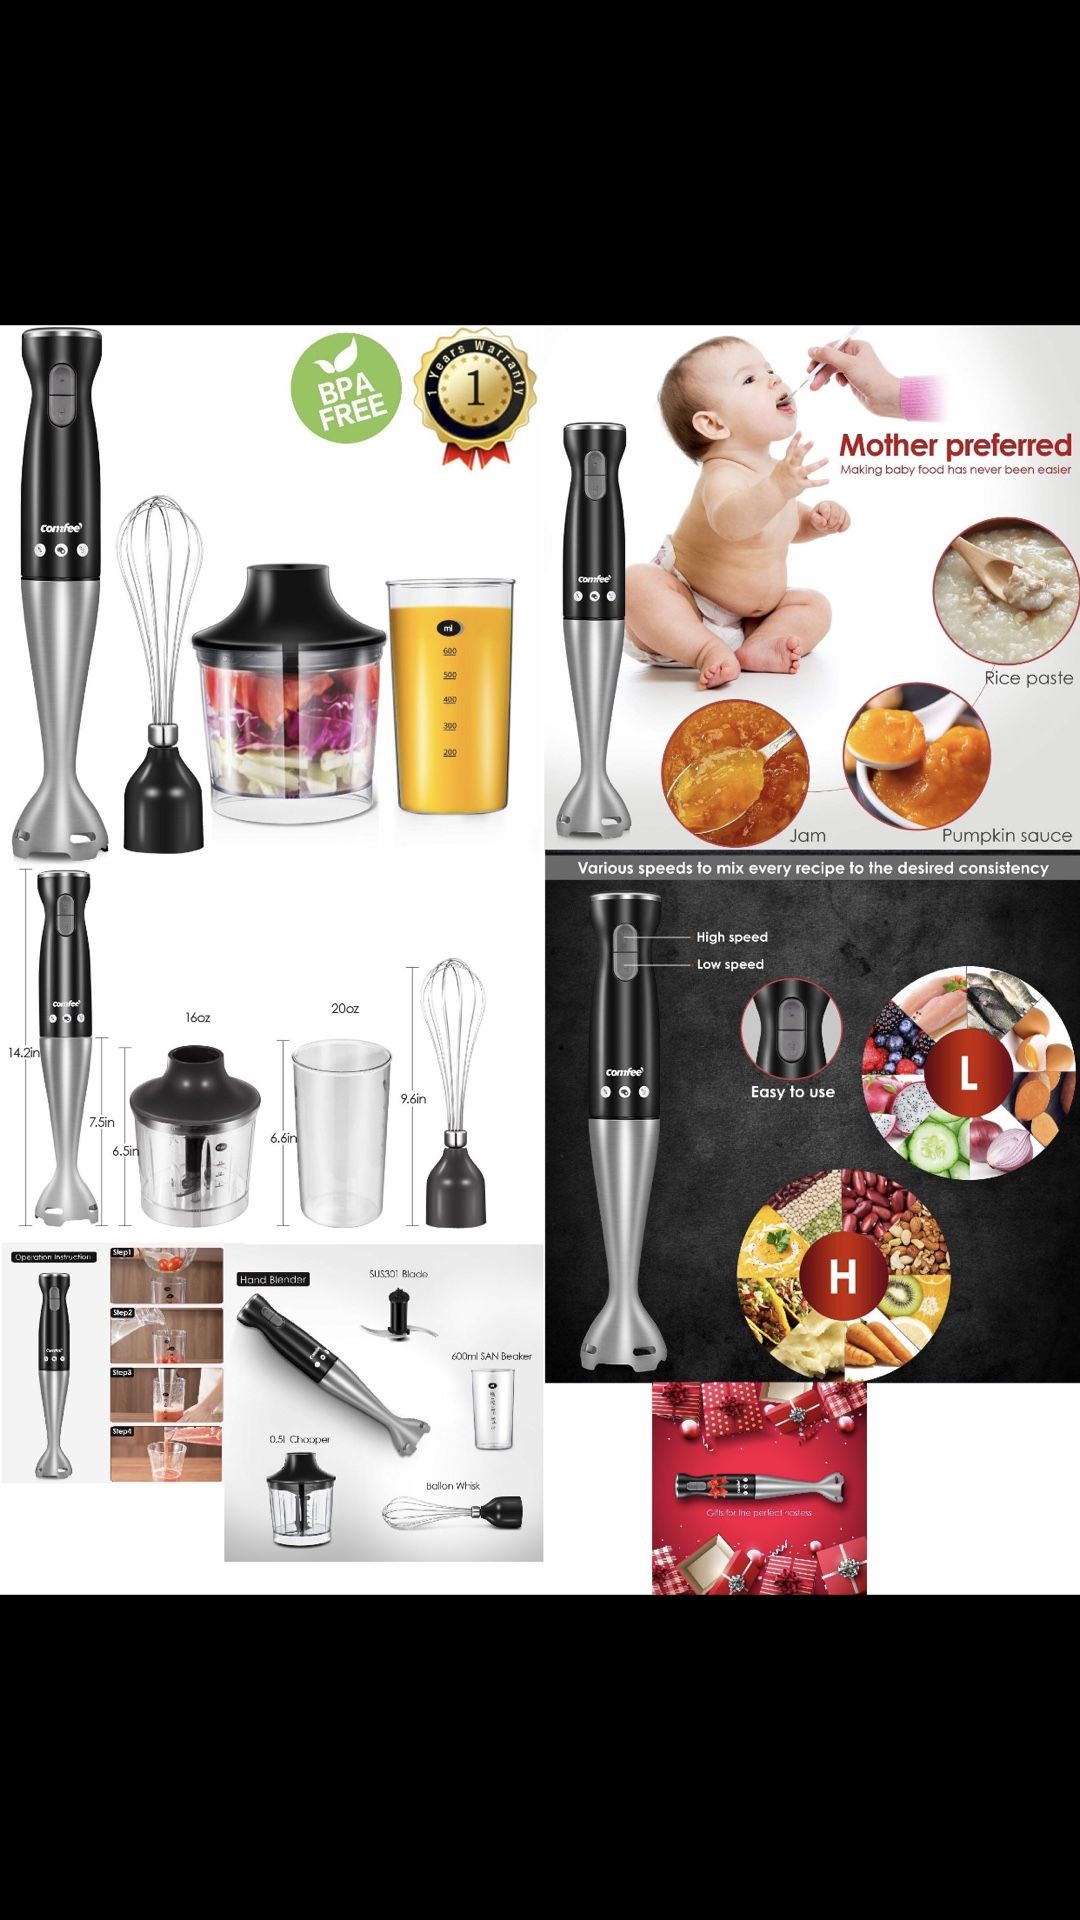 Electric Hand Immersion Blender, 4-in-1 Hand Mixer with 500ml Food Chopper, 600ml Beaker, Balloon Whisk, Stainless Steel Blending Shaft by Comfee